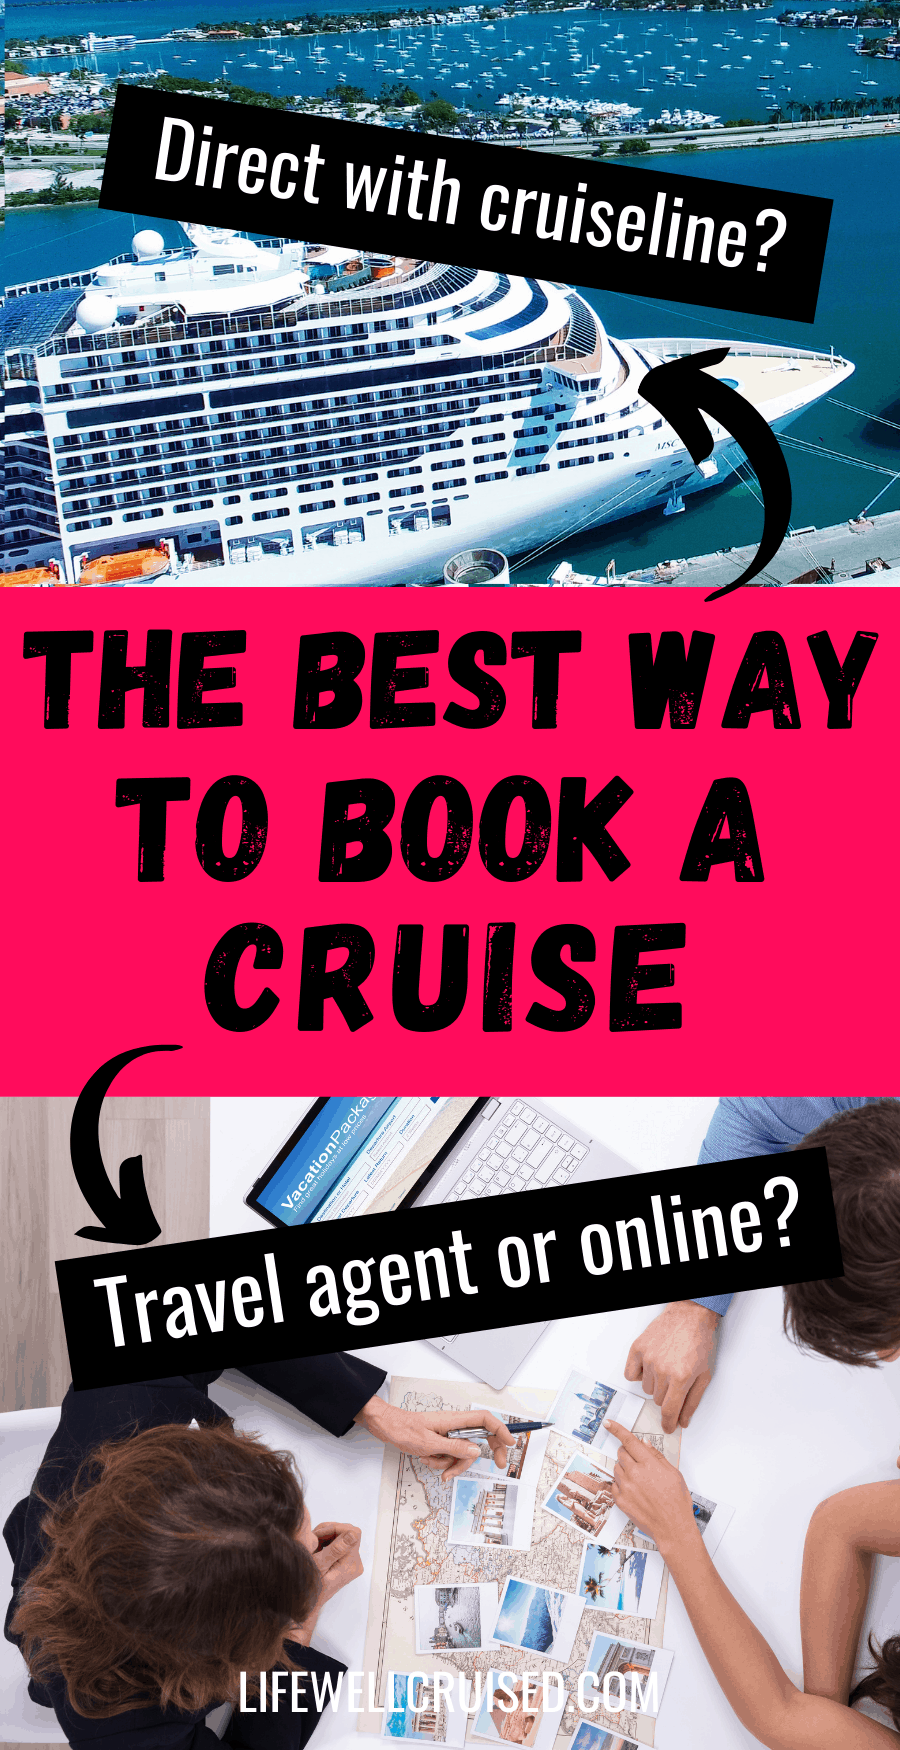 book cruise through travel agent or direct